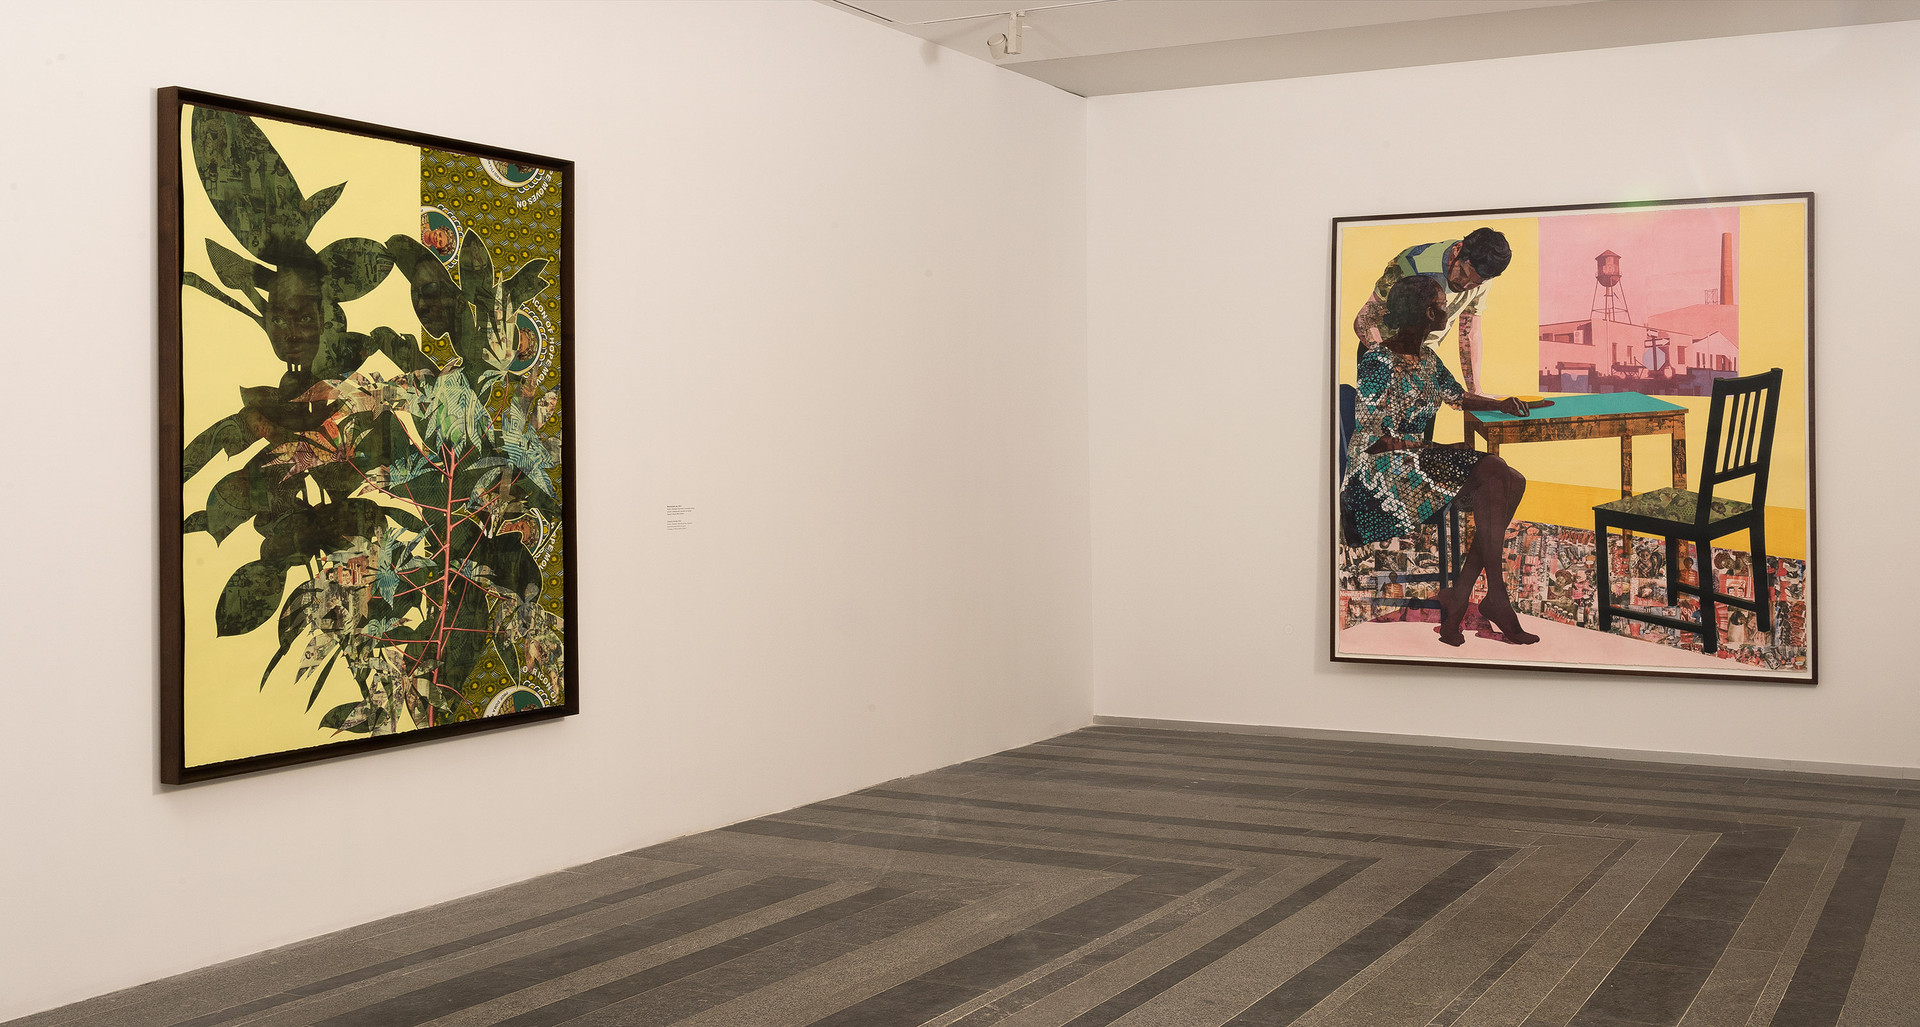 Njideka Akunyili Crosby (Nigeria). Cassava Garden, 2015. Acrylic, transfers, colored pencils, charcoal, commemorative fabric on paper. Courtesy of Victoria Miro Gallery. PinchukArtCentre © 2017. Photographed by Sergey Illin